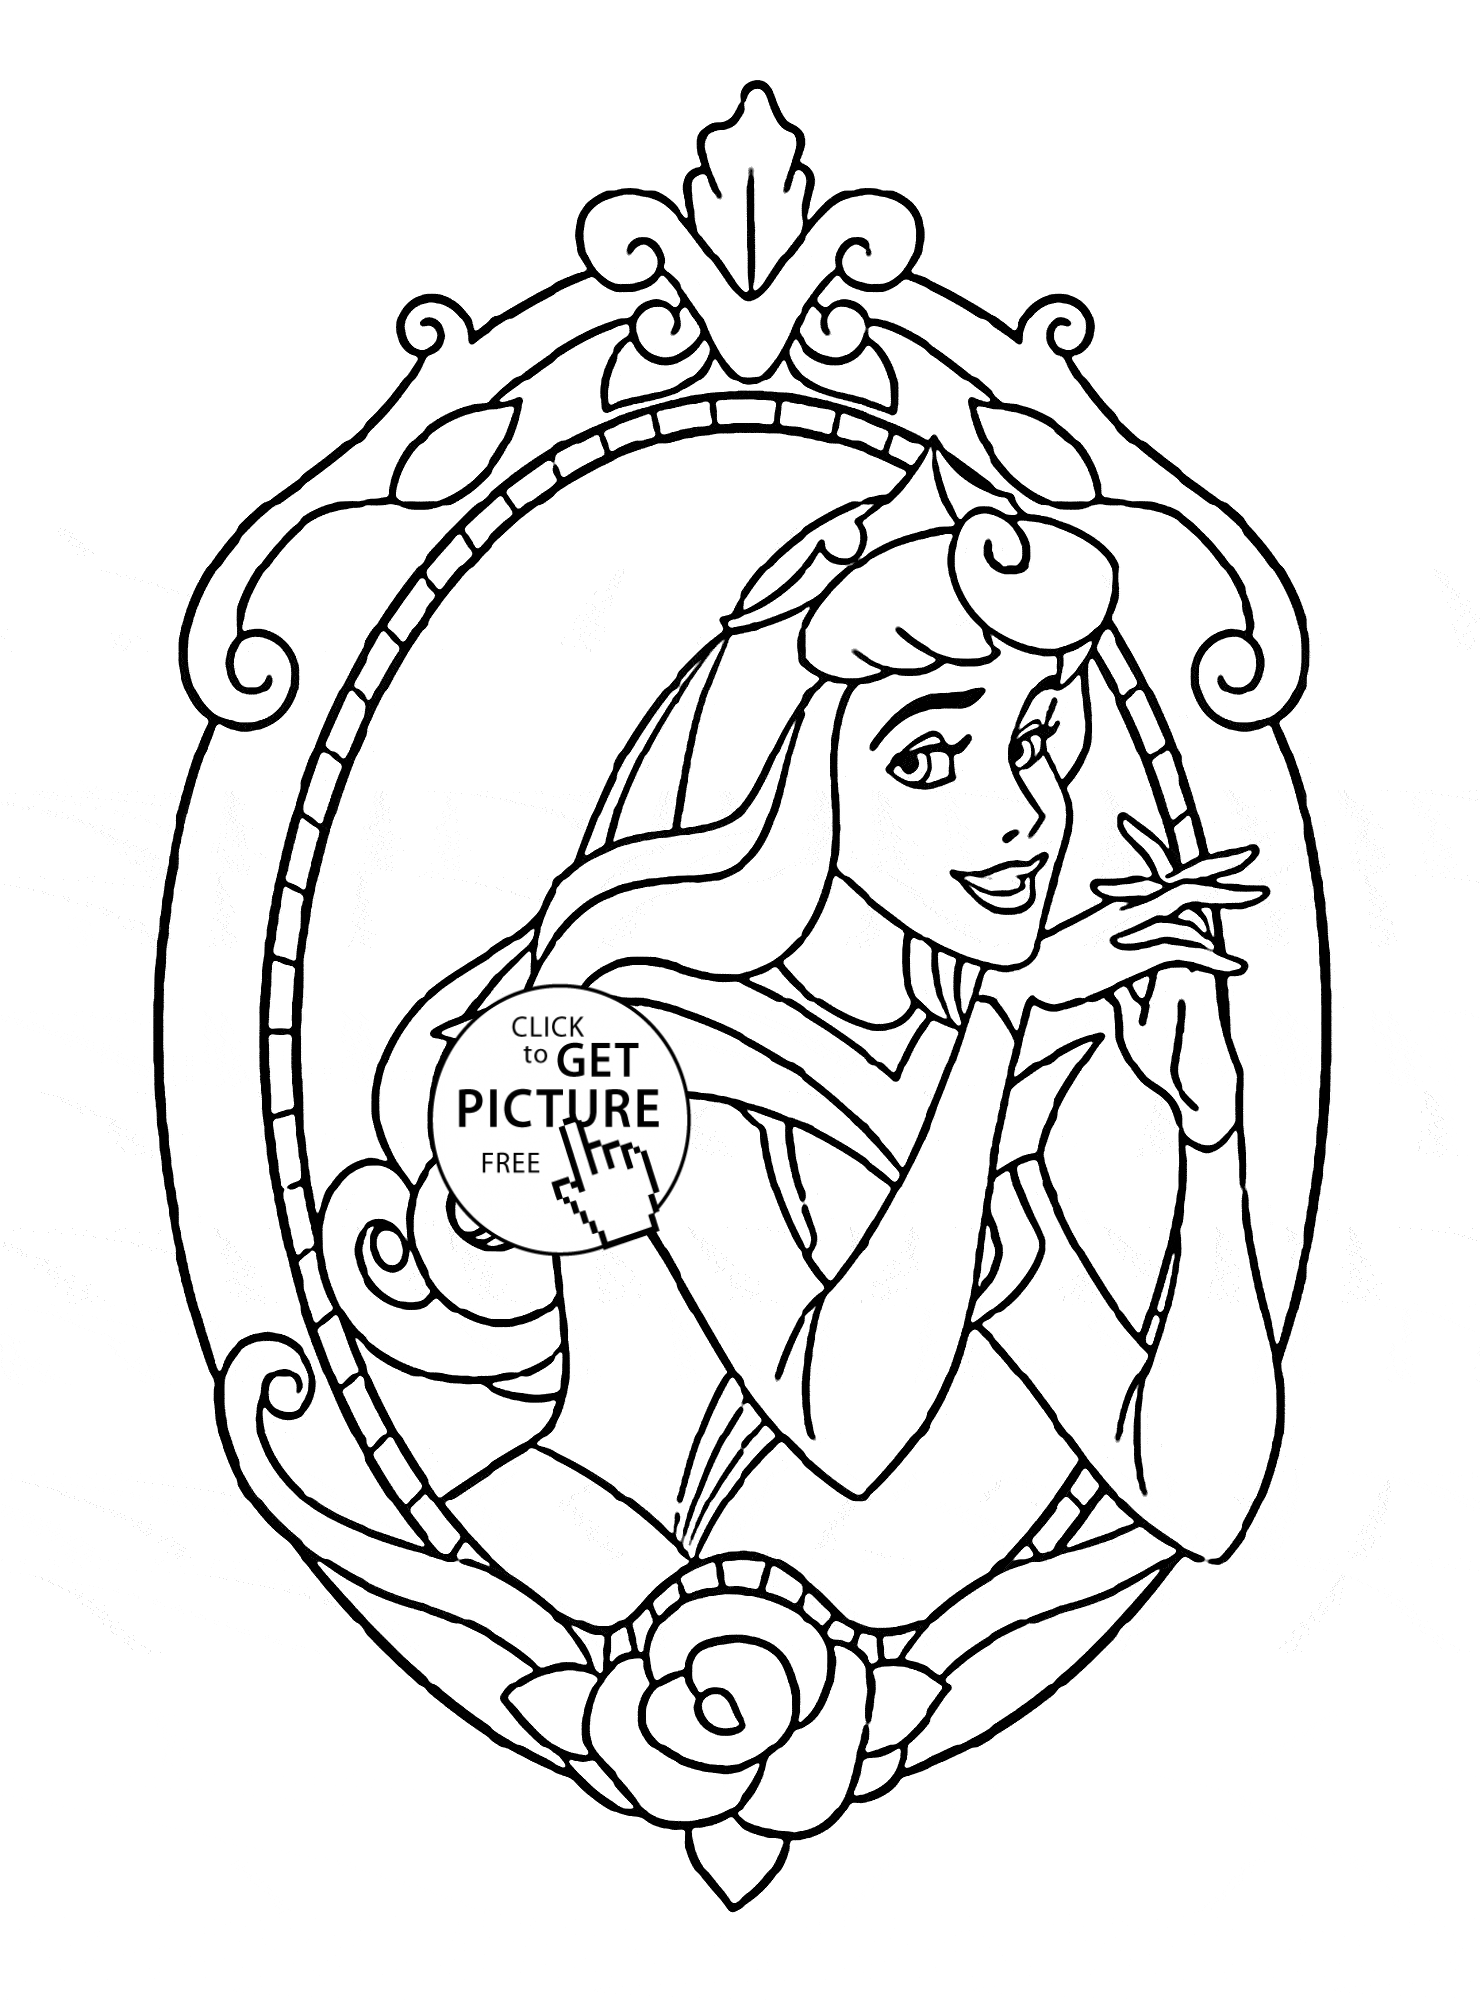 Aurora Princess Coloring Pages   Coloring Home